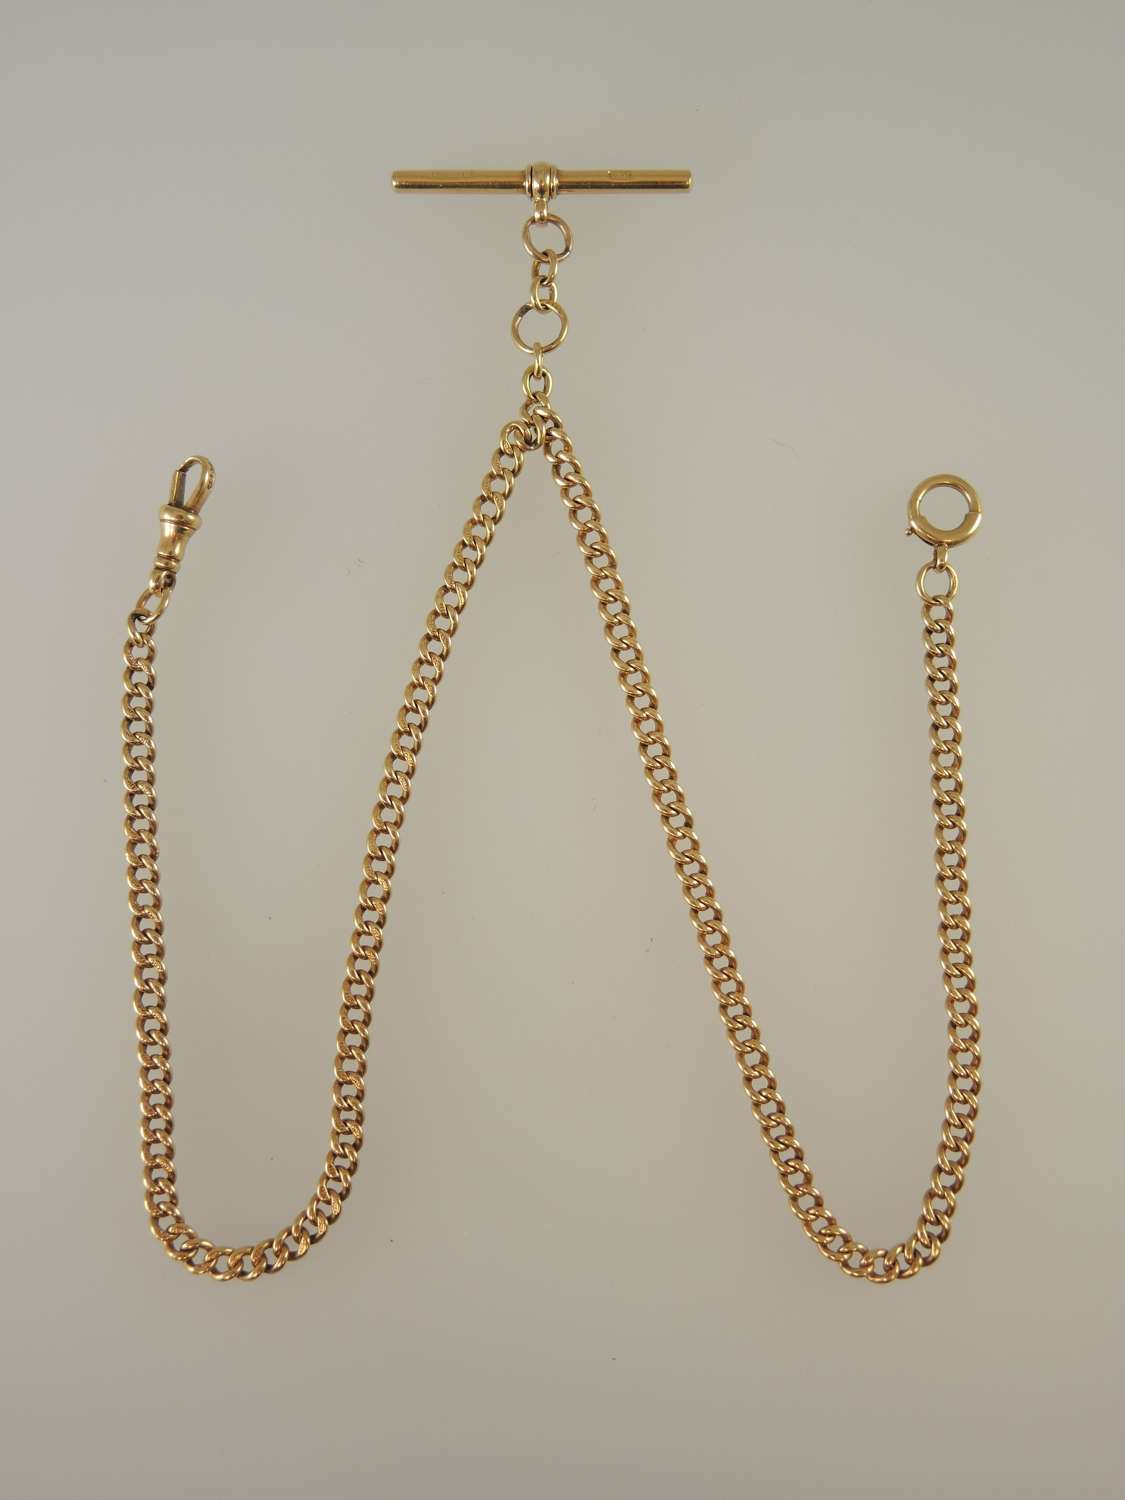 Solid 18K Gold pocket watch chain. Double. 420mm. c1900